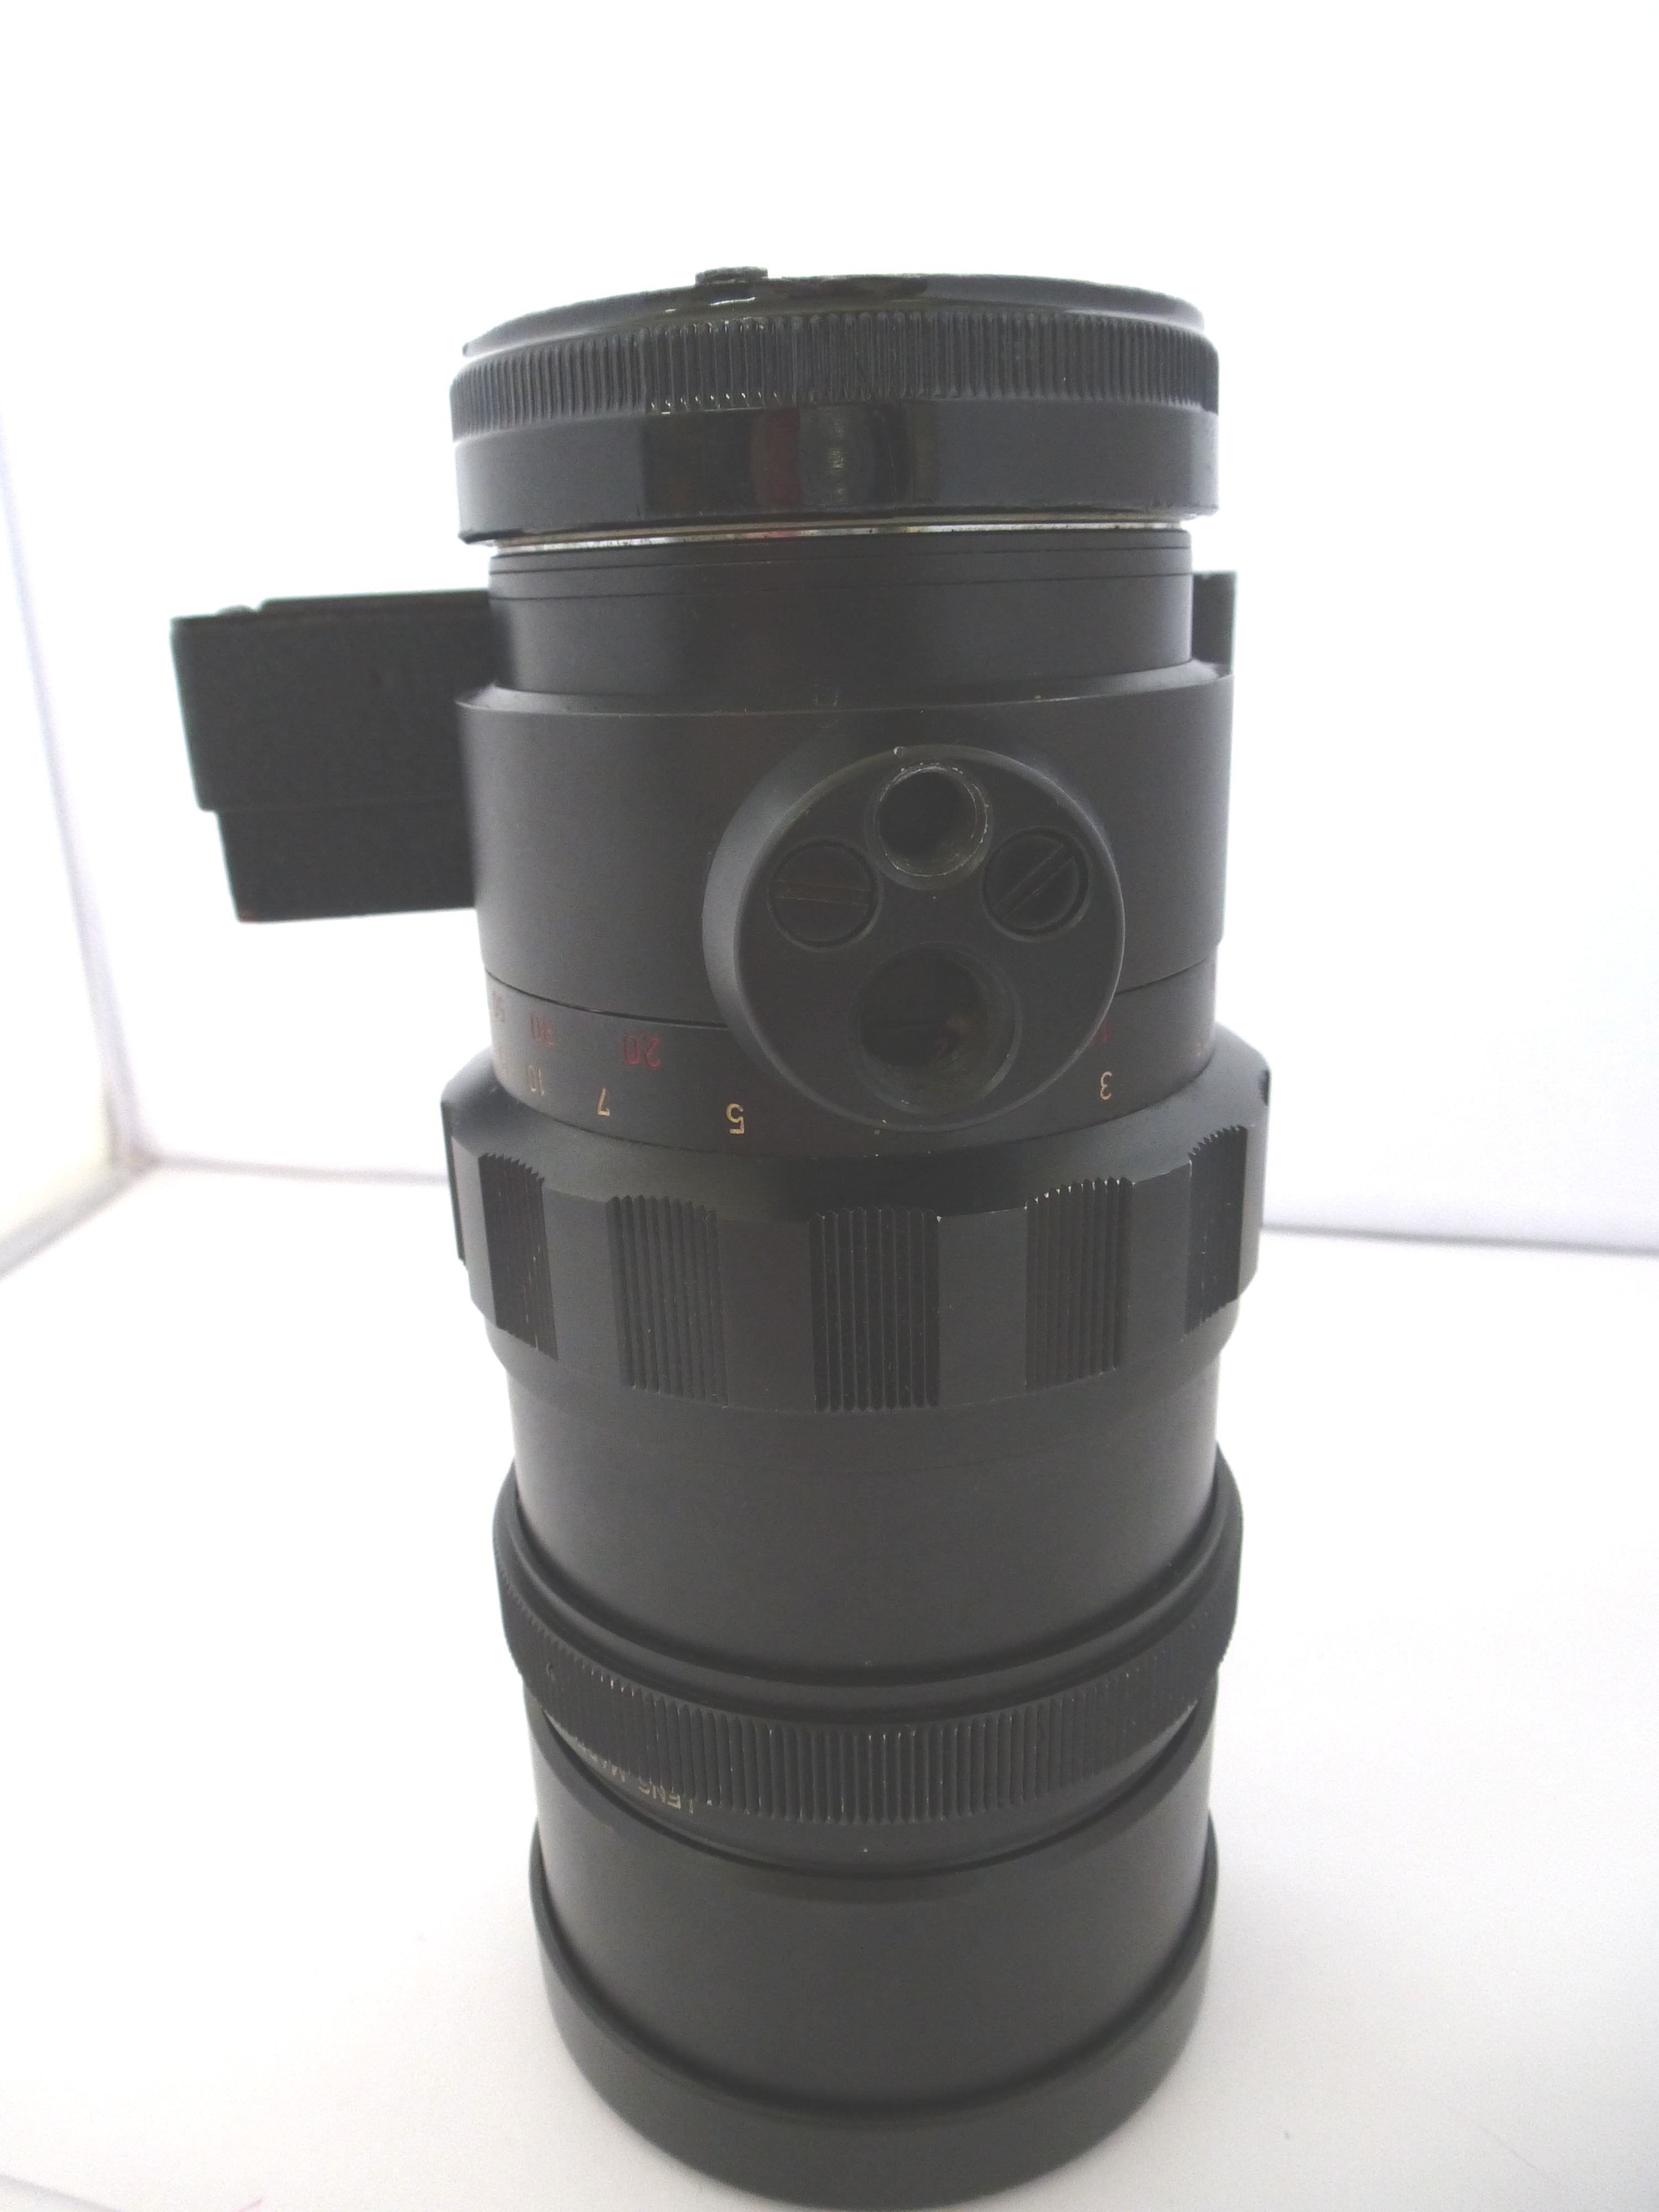 LEITZ CANADA ELMARIT 1:2.8/135 LENS - 2011036 WITH GOGGLES - Image 3 of 8